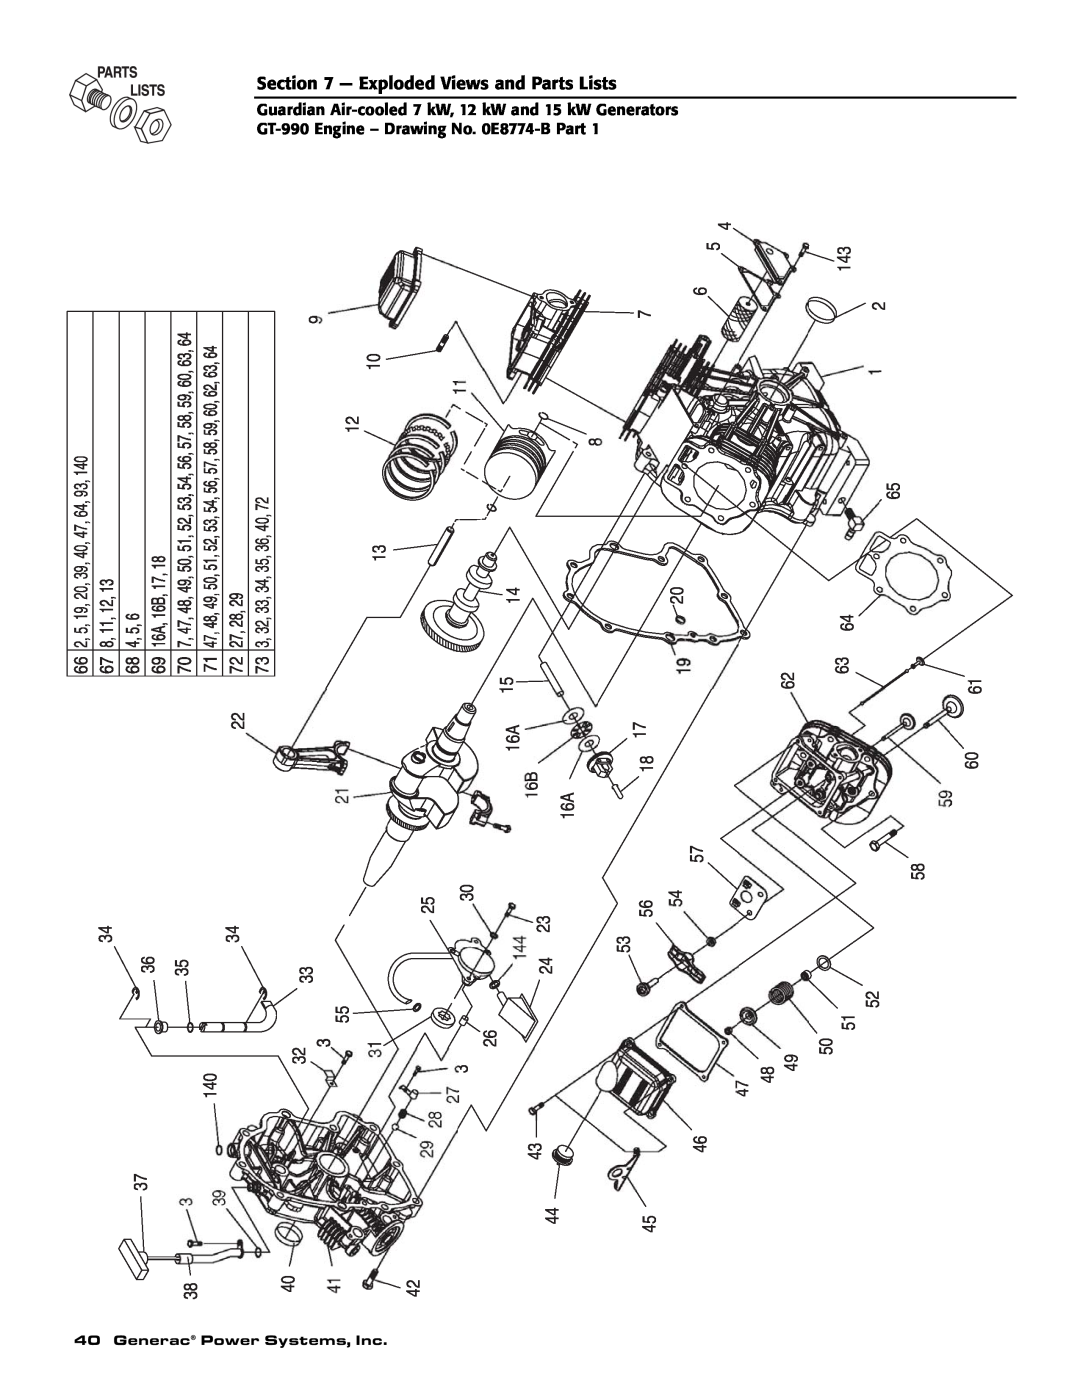 Guardian Technologies 04389-2 Exploded Views and Parts Lists, 5, 19, 20, 39, 40, 32, 33, 34, Generac Power Systems, Inc 